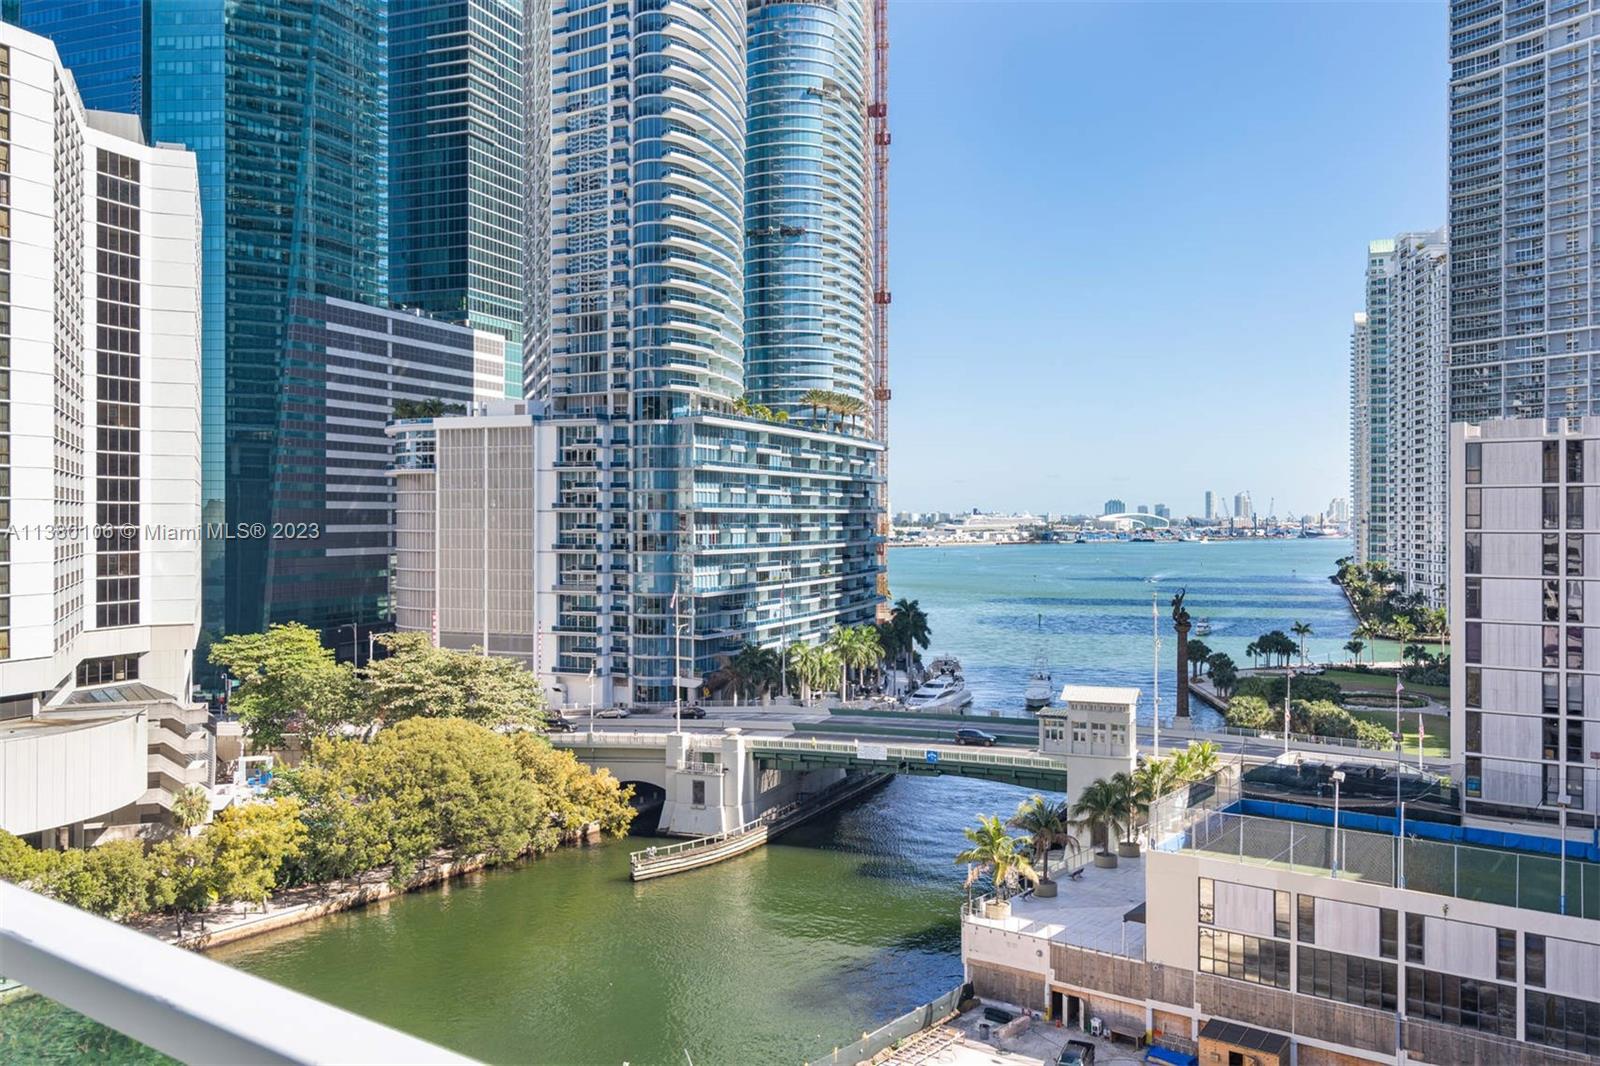 Brickell on the River South image #19